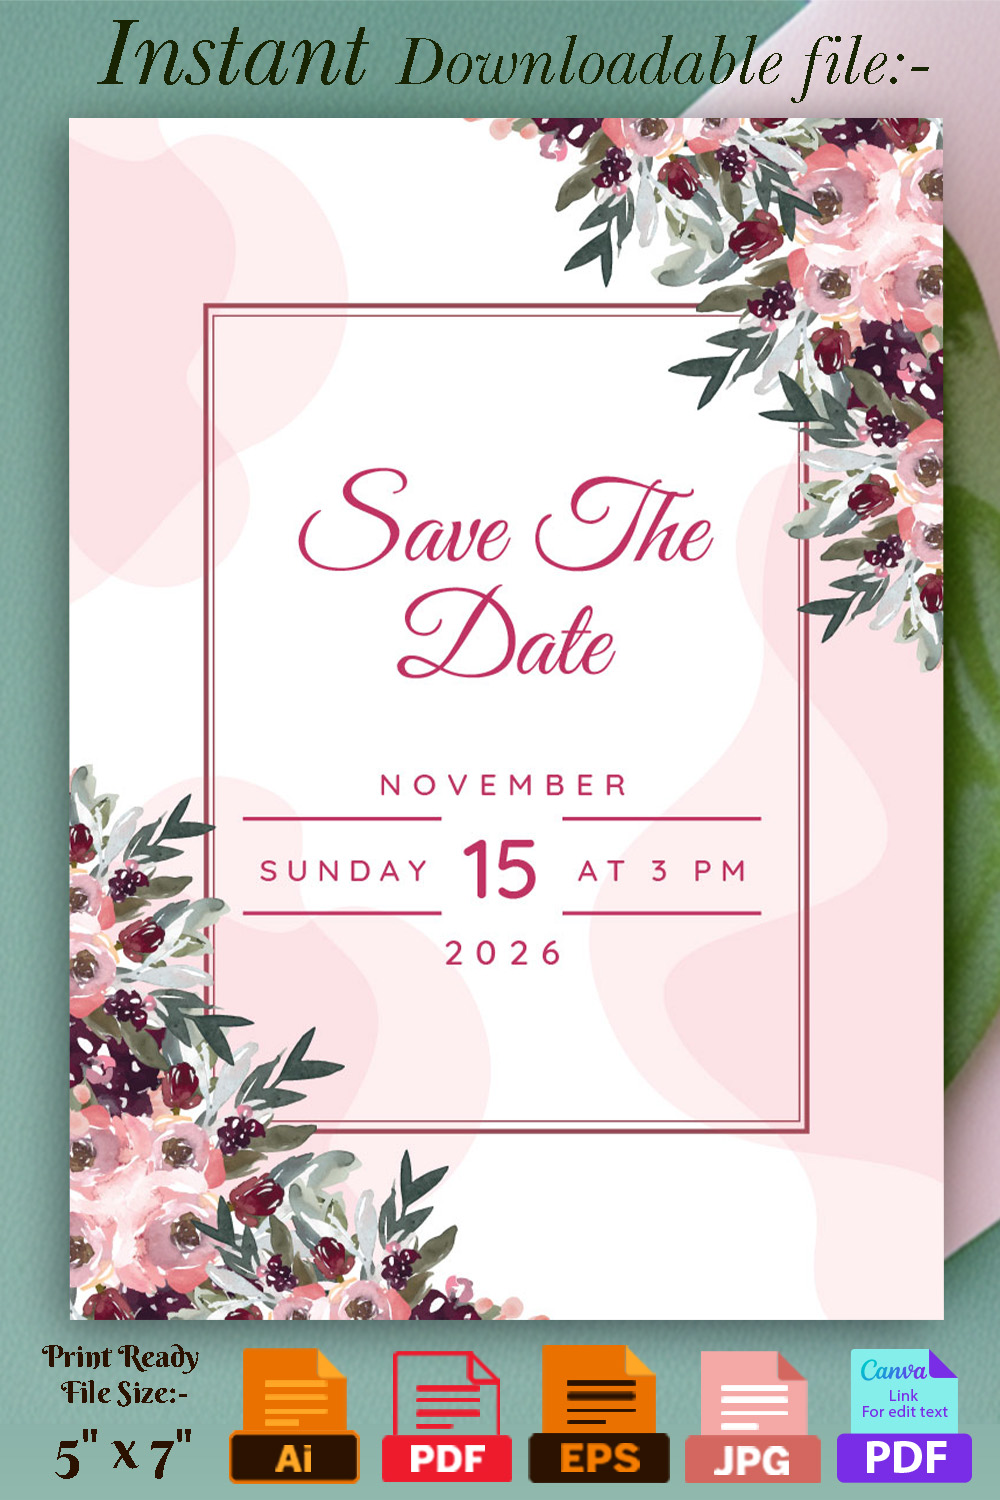 Image of gorgeous wedding invitation with flowers.